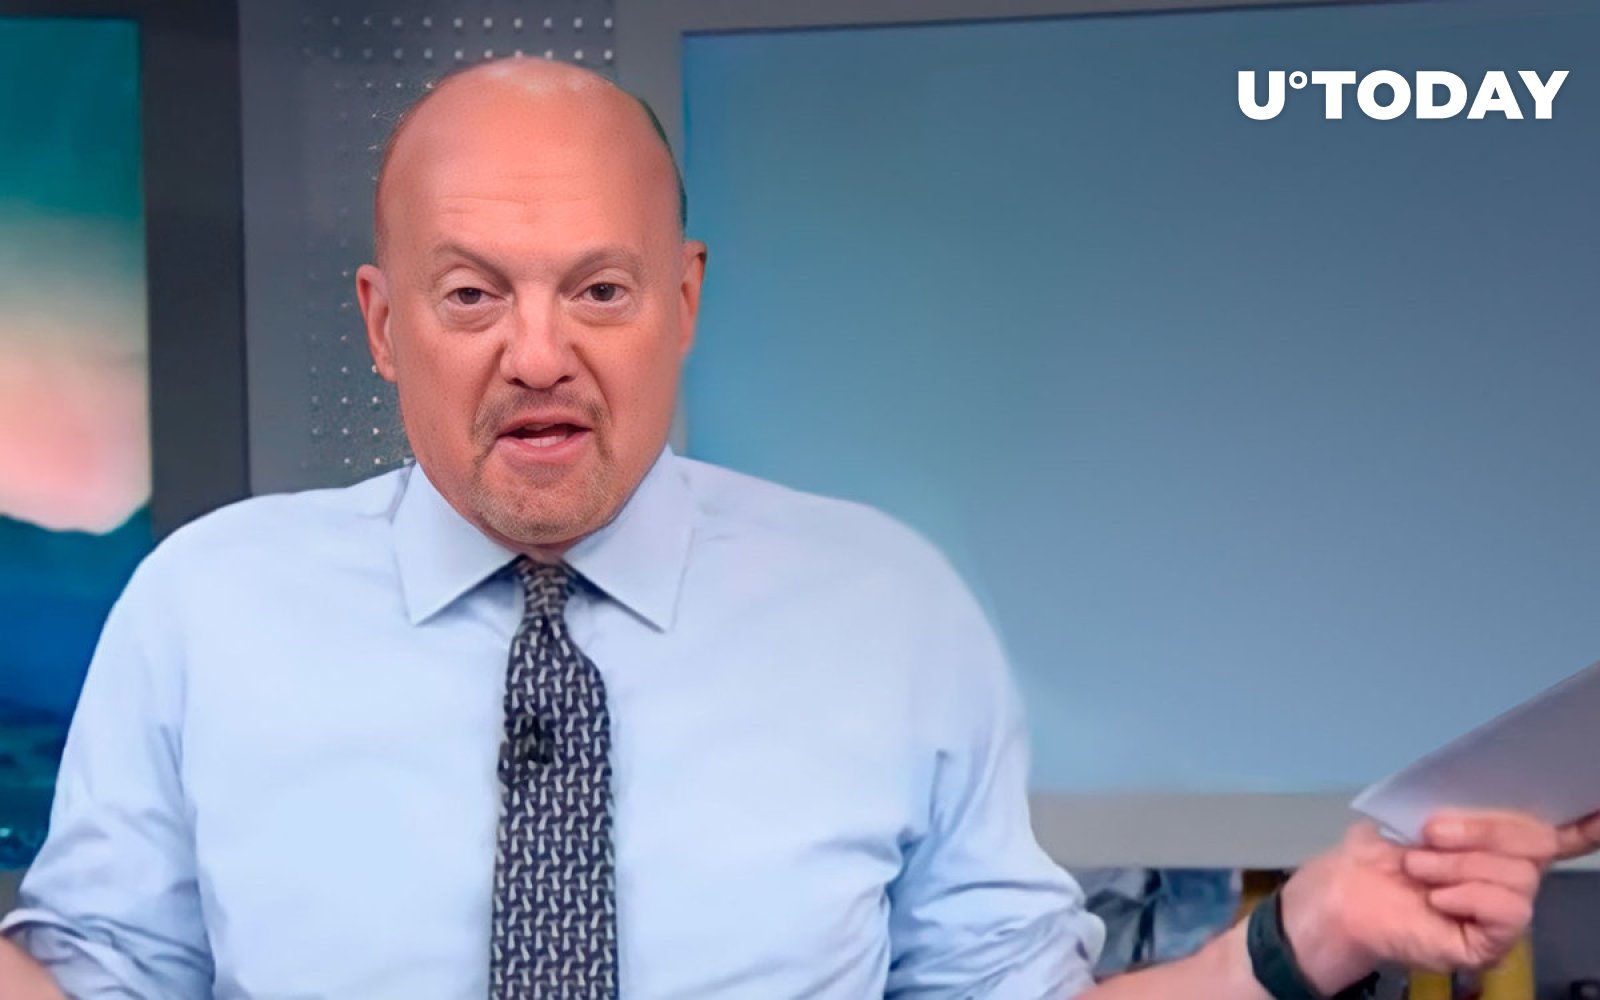 Jim Cramer Tweets About Crypto, But Community Doesn’t Find It Funny